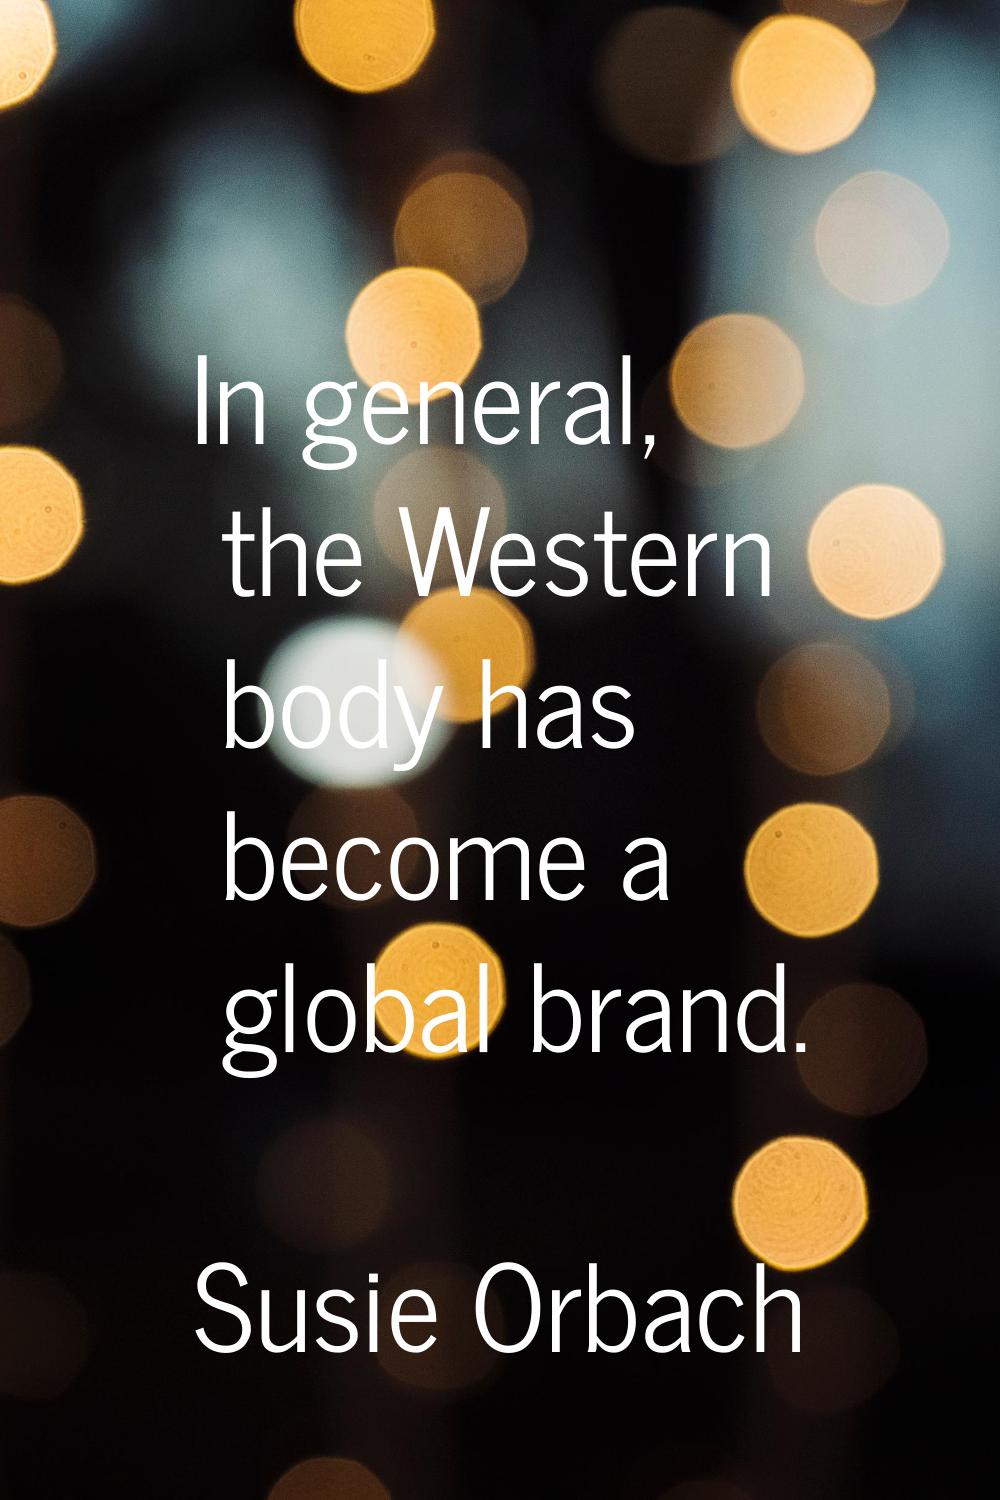 In general, the Western body has become a global brand.